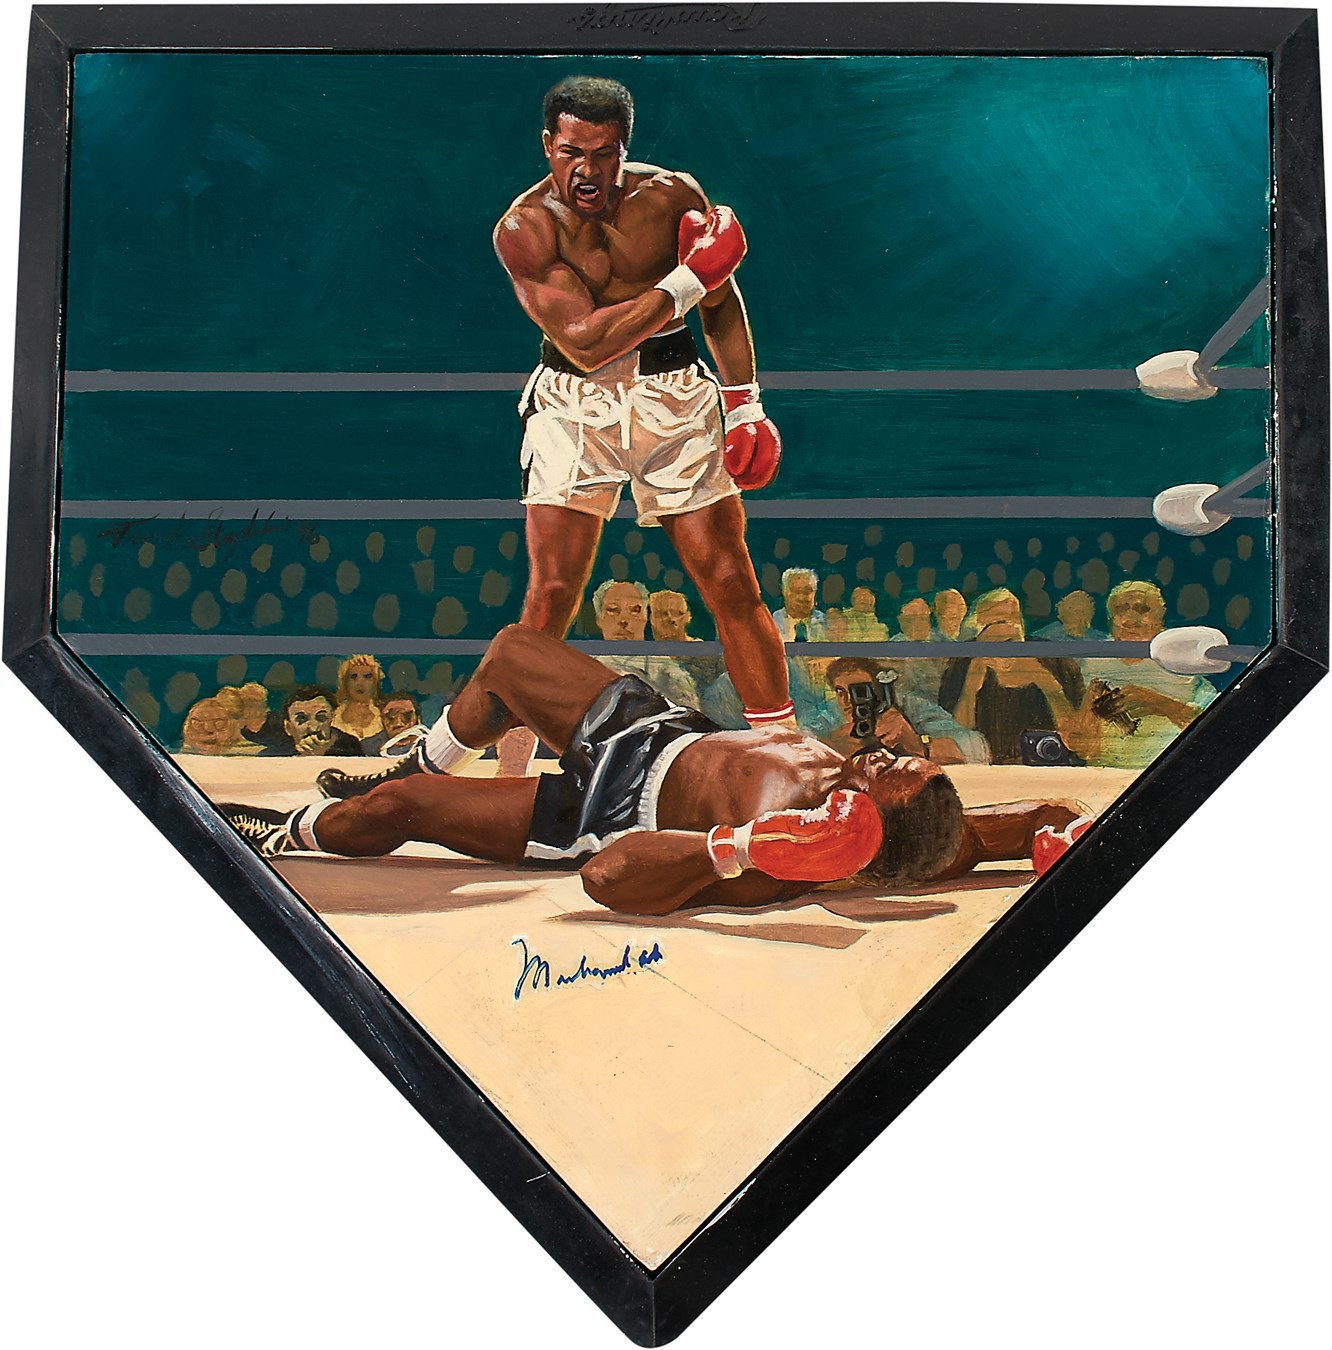 Classic Ali vs. Liston Oil Painting on Home Plate Signed by Muhammad Ali (JSA LOA)